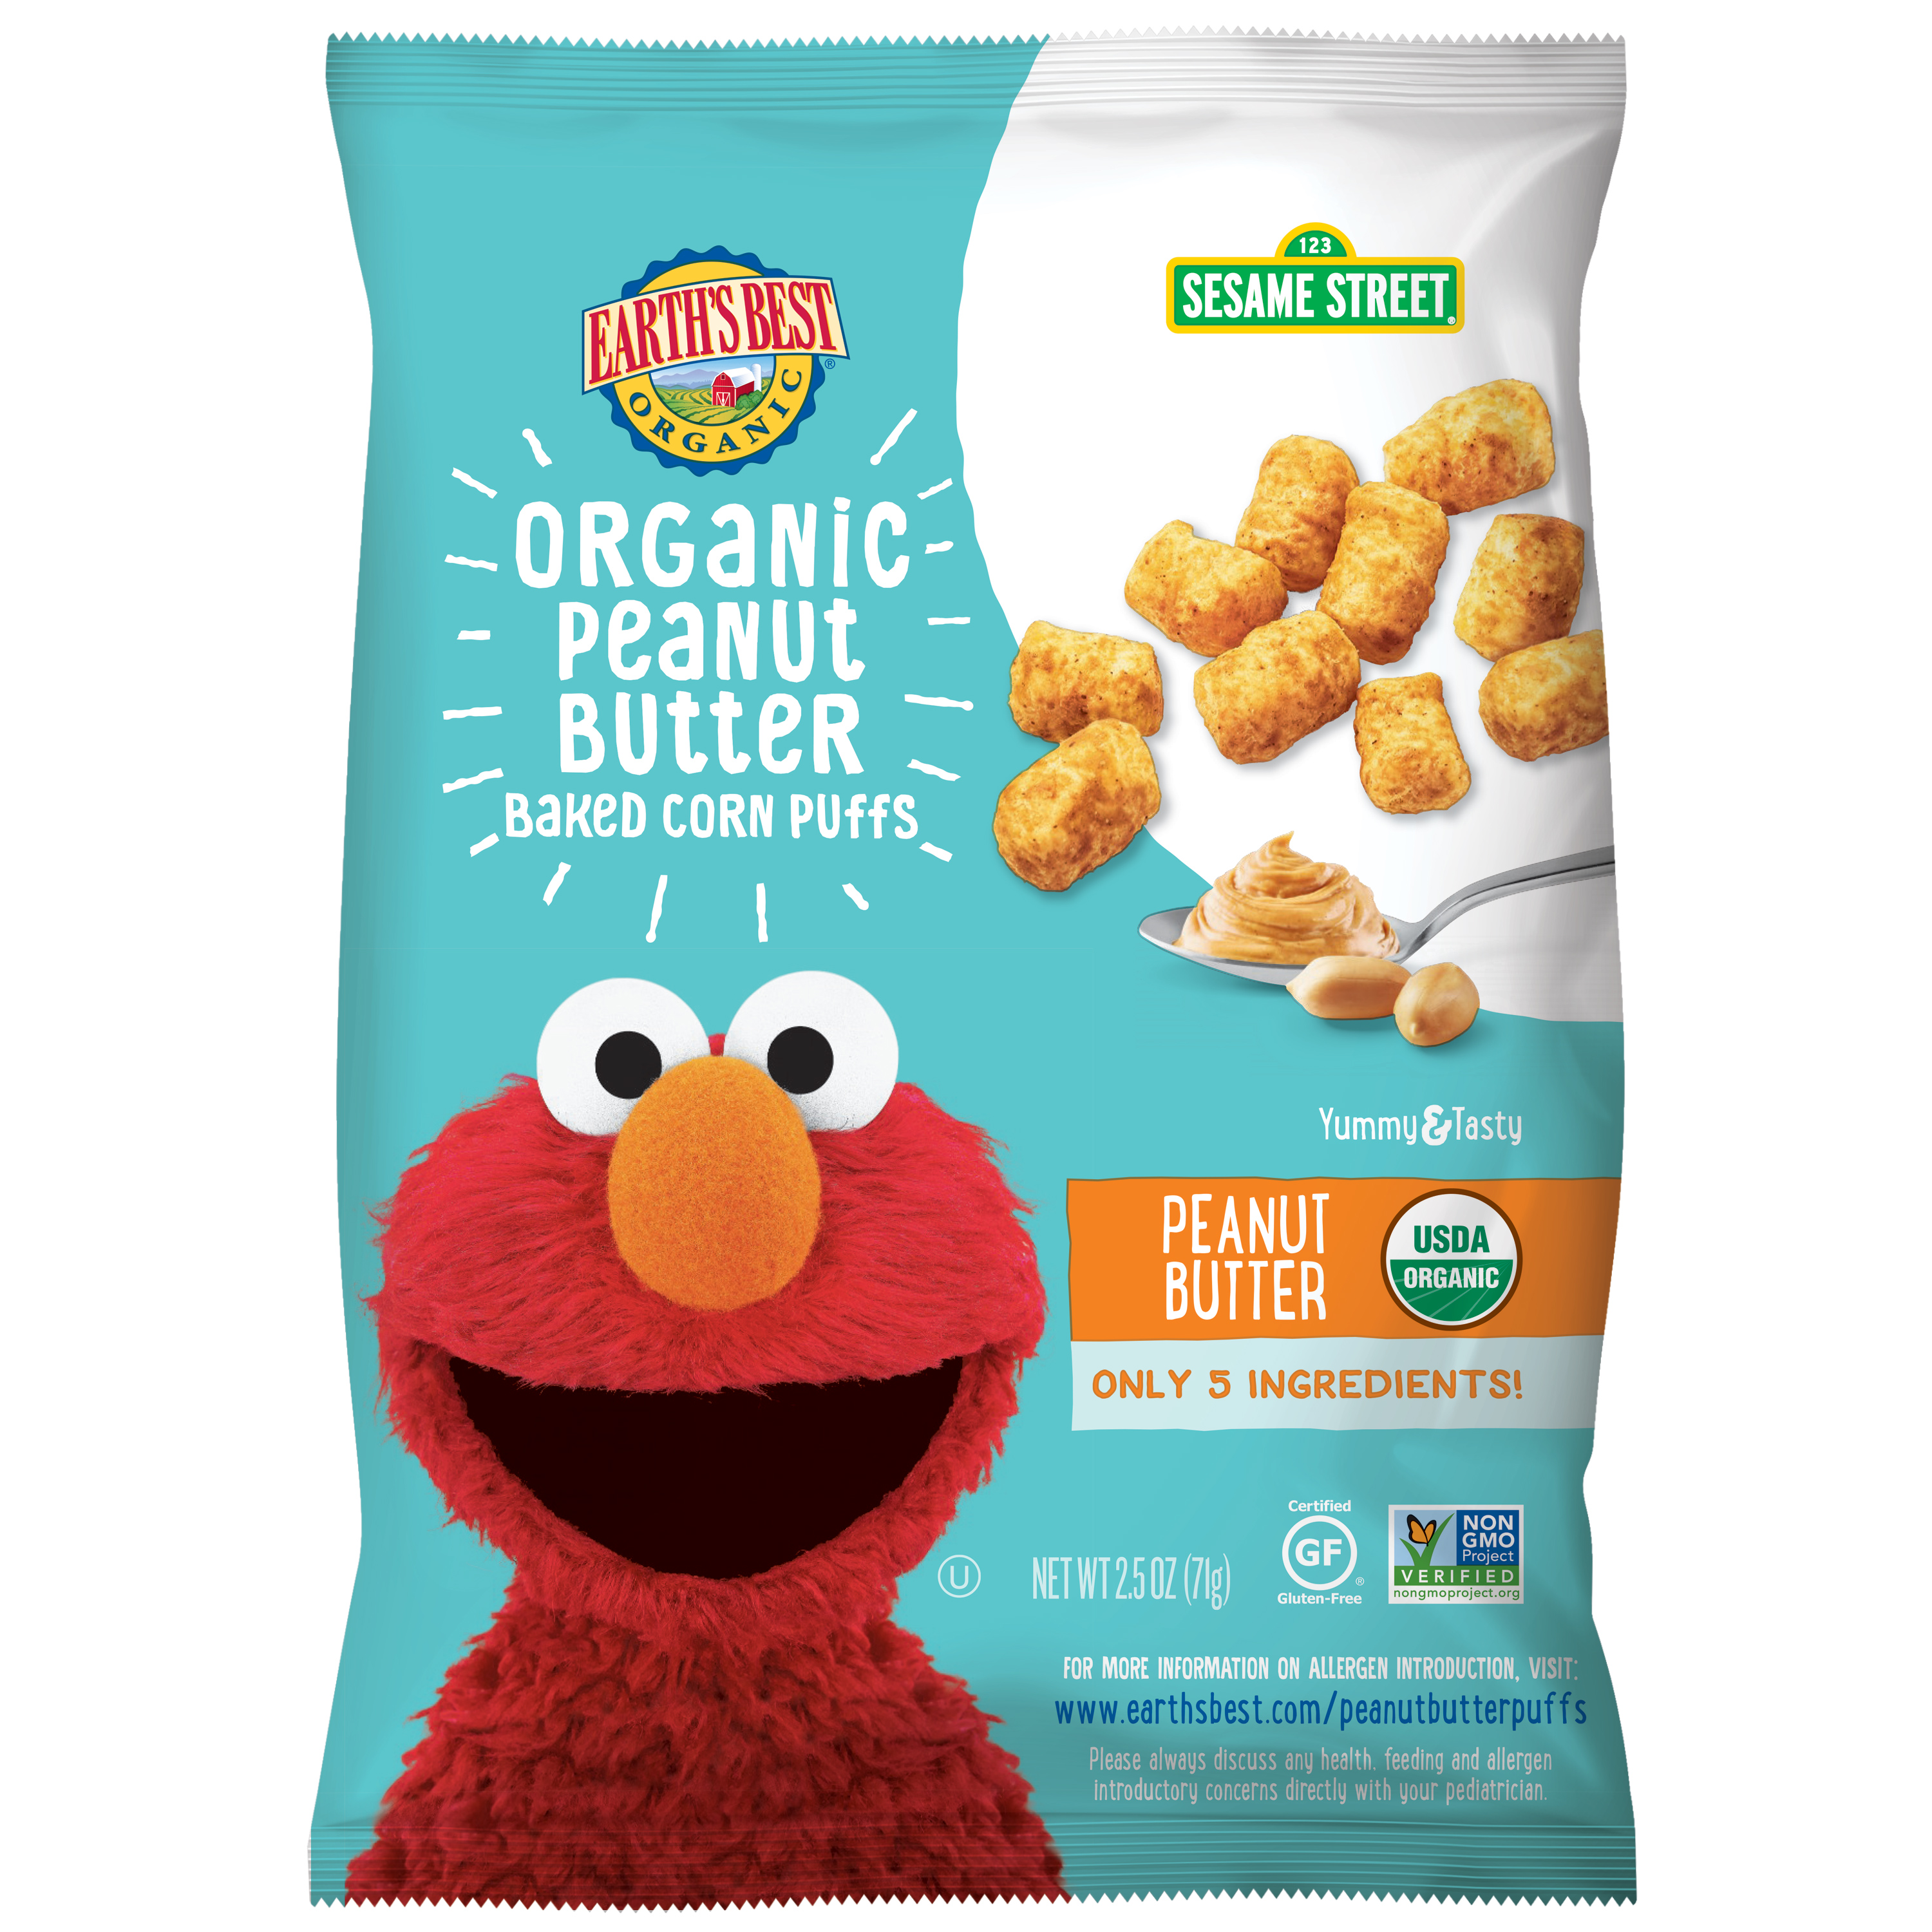 Earth's Best Organic Toddler Snacks, Peanut Butter Baked Corn Puffs, 2.5 oz. Bag - image 1 of 2